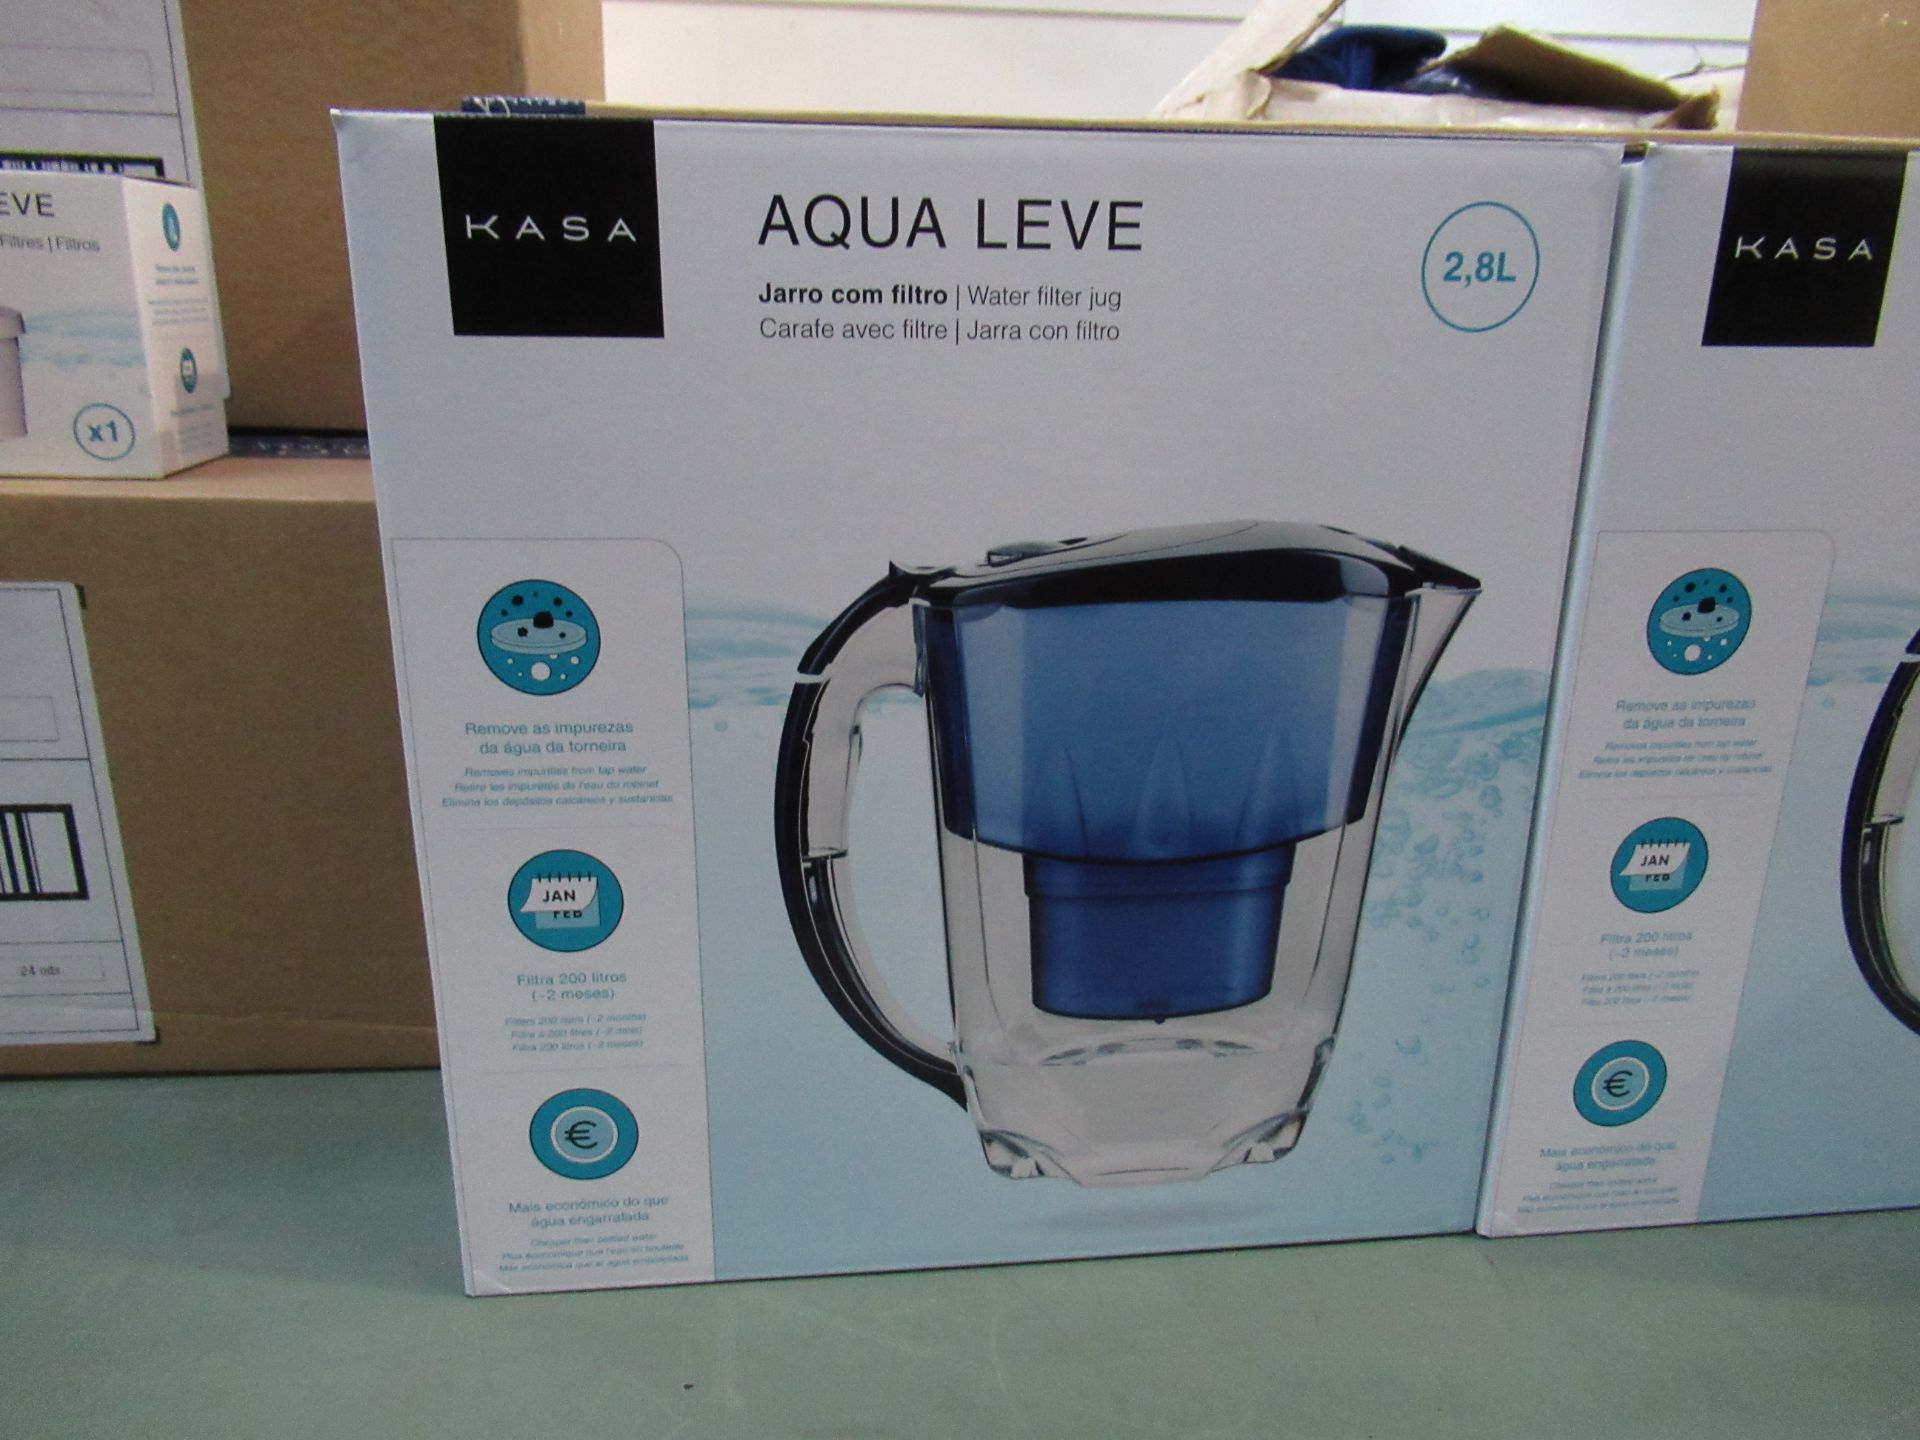 Kasa 2.8 Litre water filter jugs (10x boxed) and filters (60x boxed) - Image 2 of 3